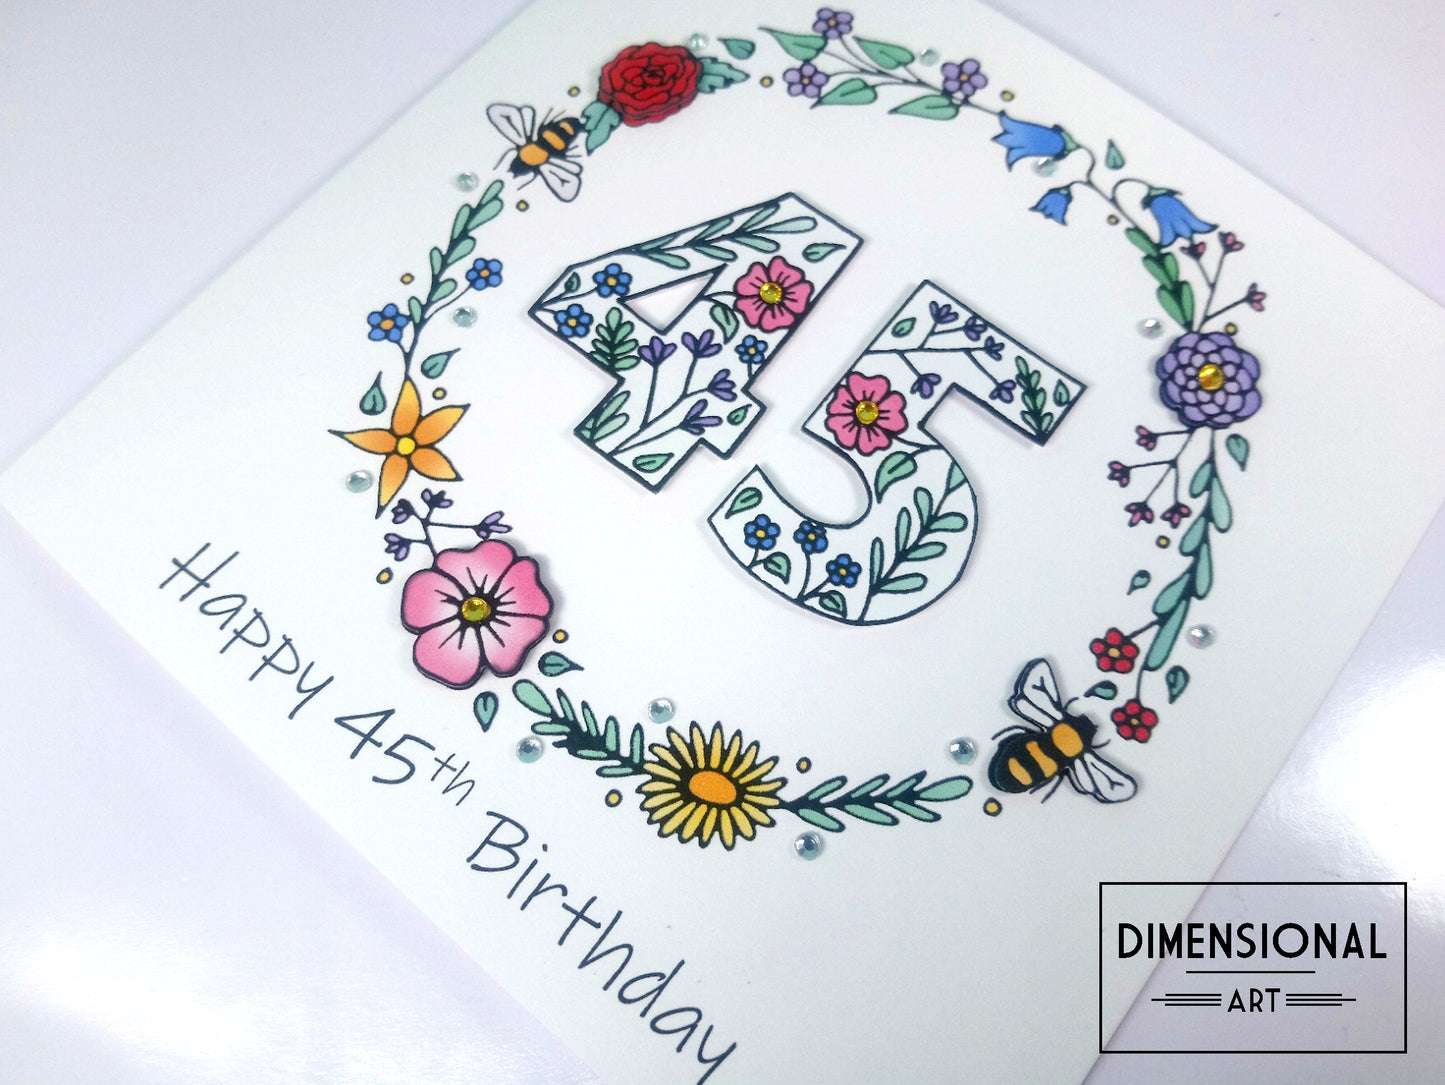 45th Flowers and Bees Birthday Card